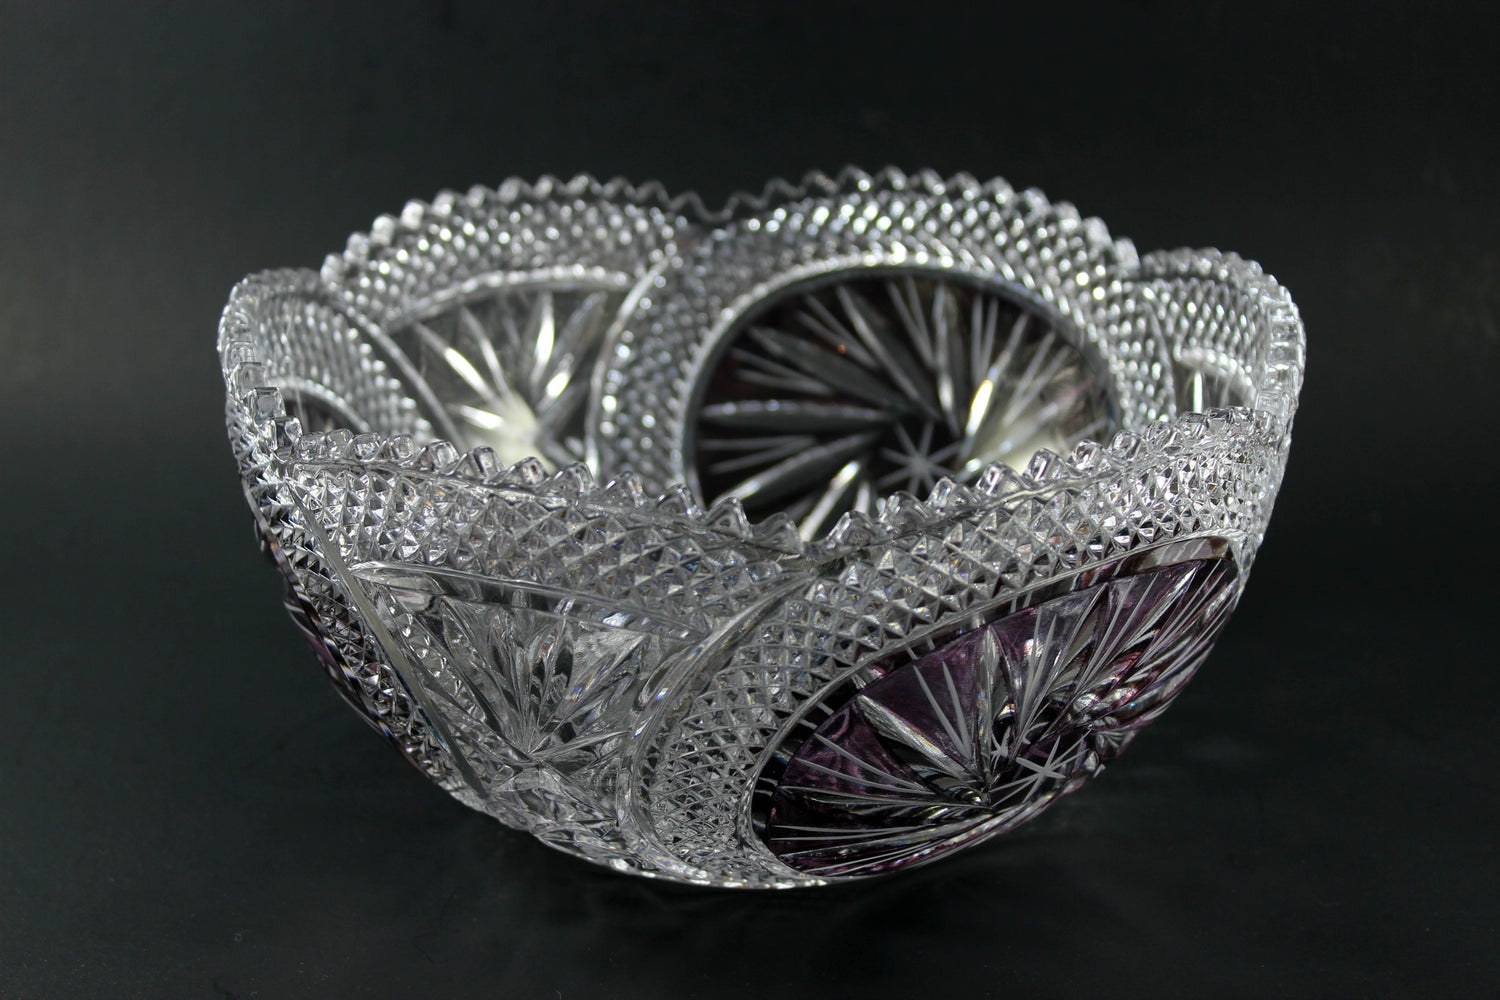 Pinwheel Crystal Large Bowl with Burgundy Accents